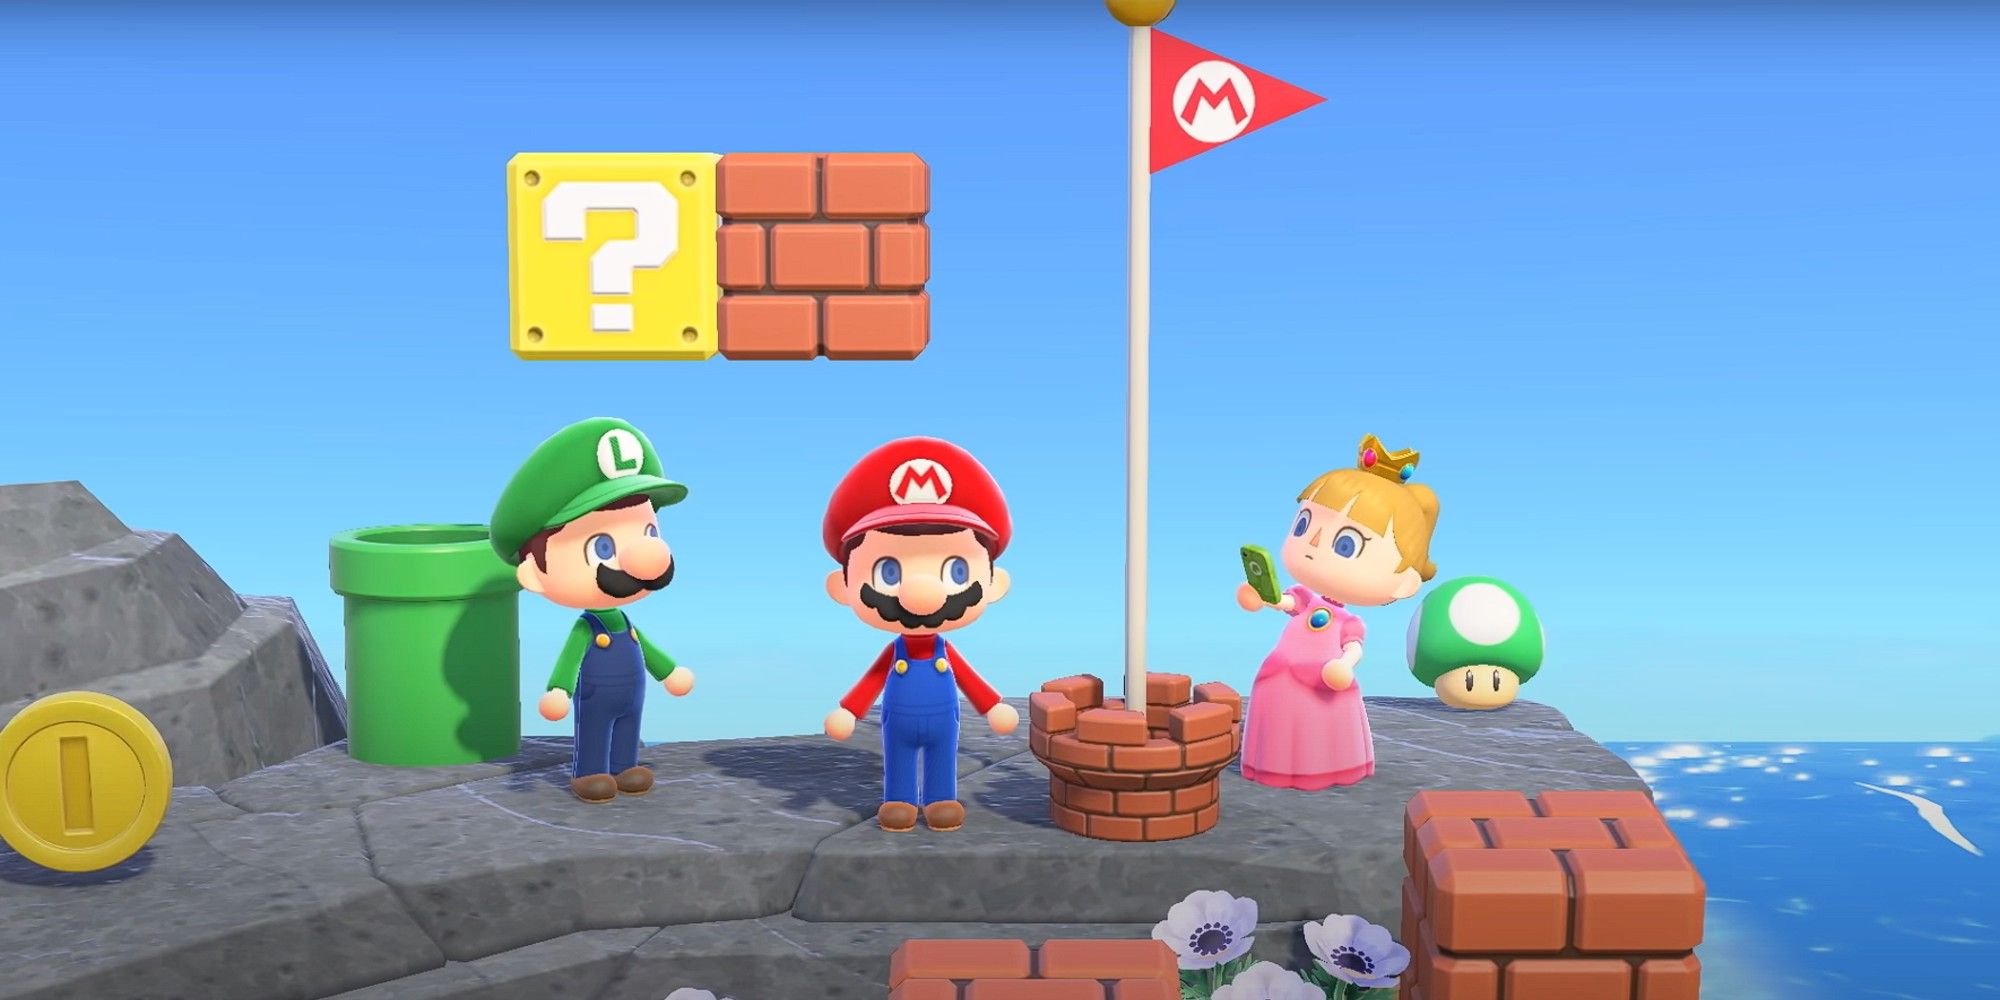 Every New Super Mario Furniture Item Coming to Animal Crossing